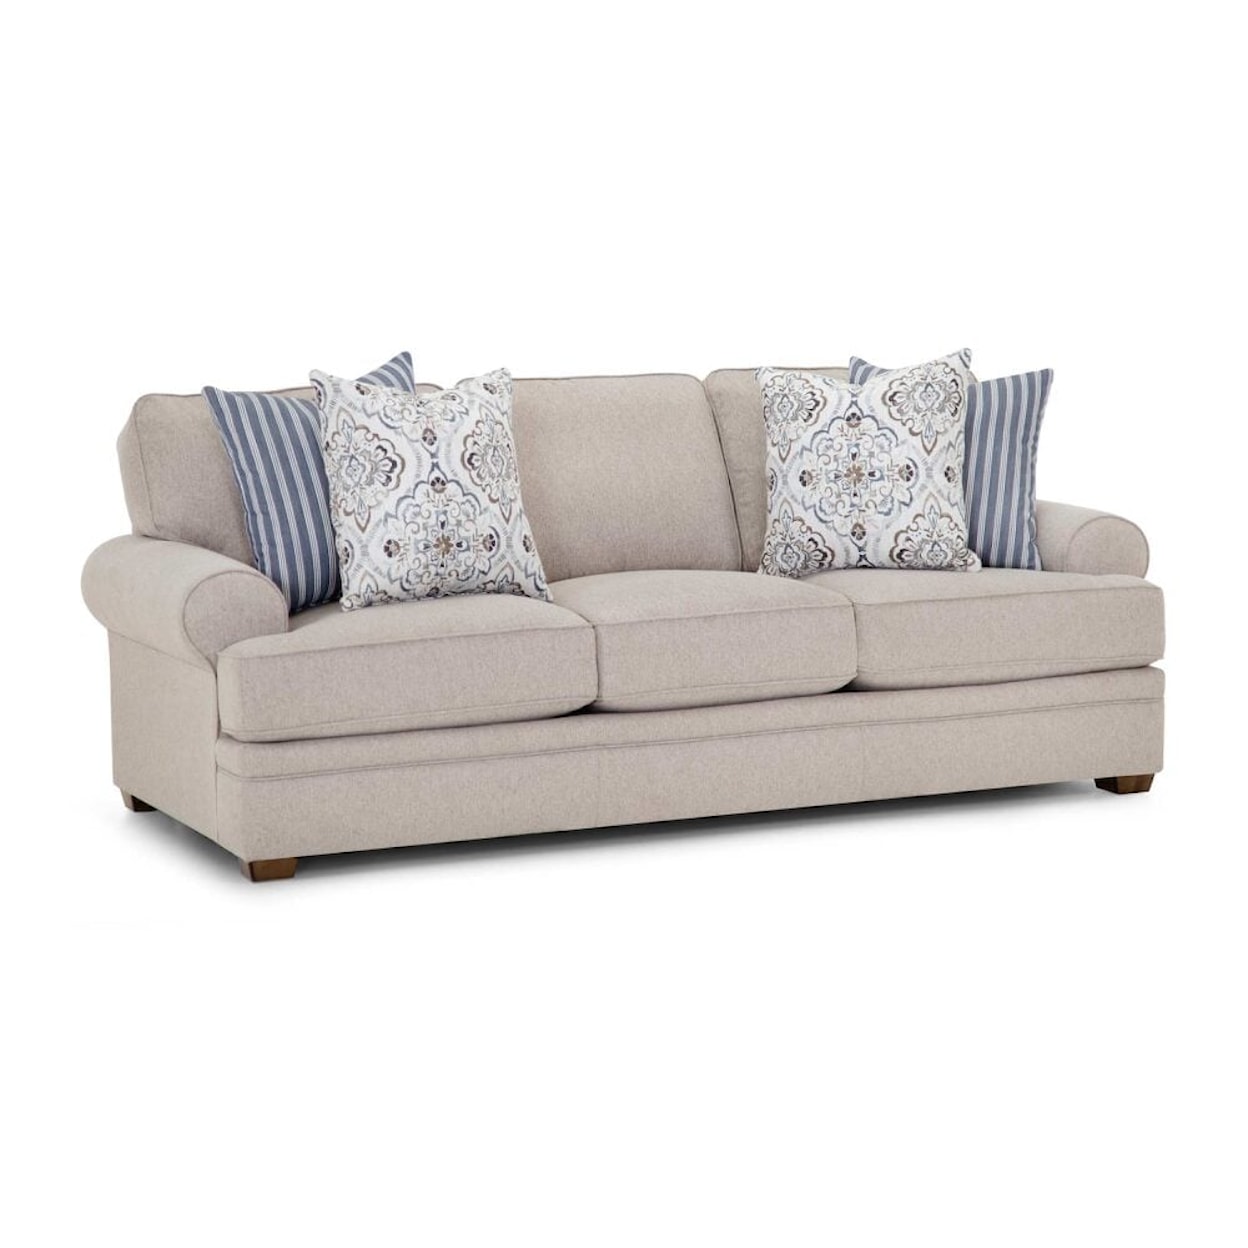 Franklin 915 Anniston Stationary Living Room Group